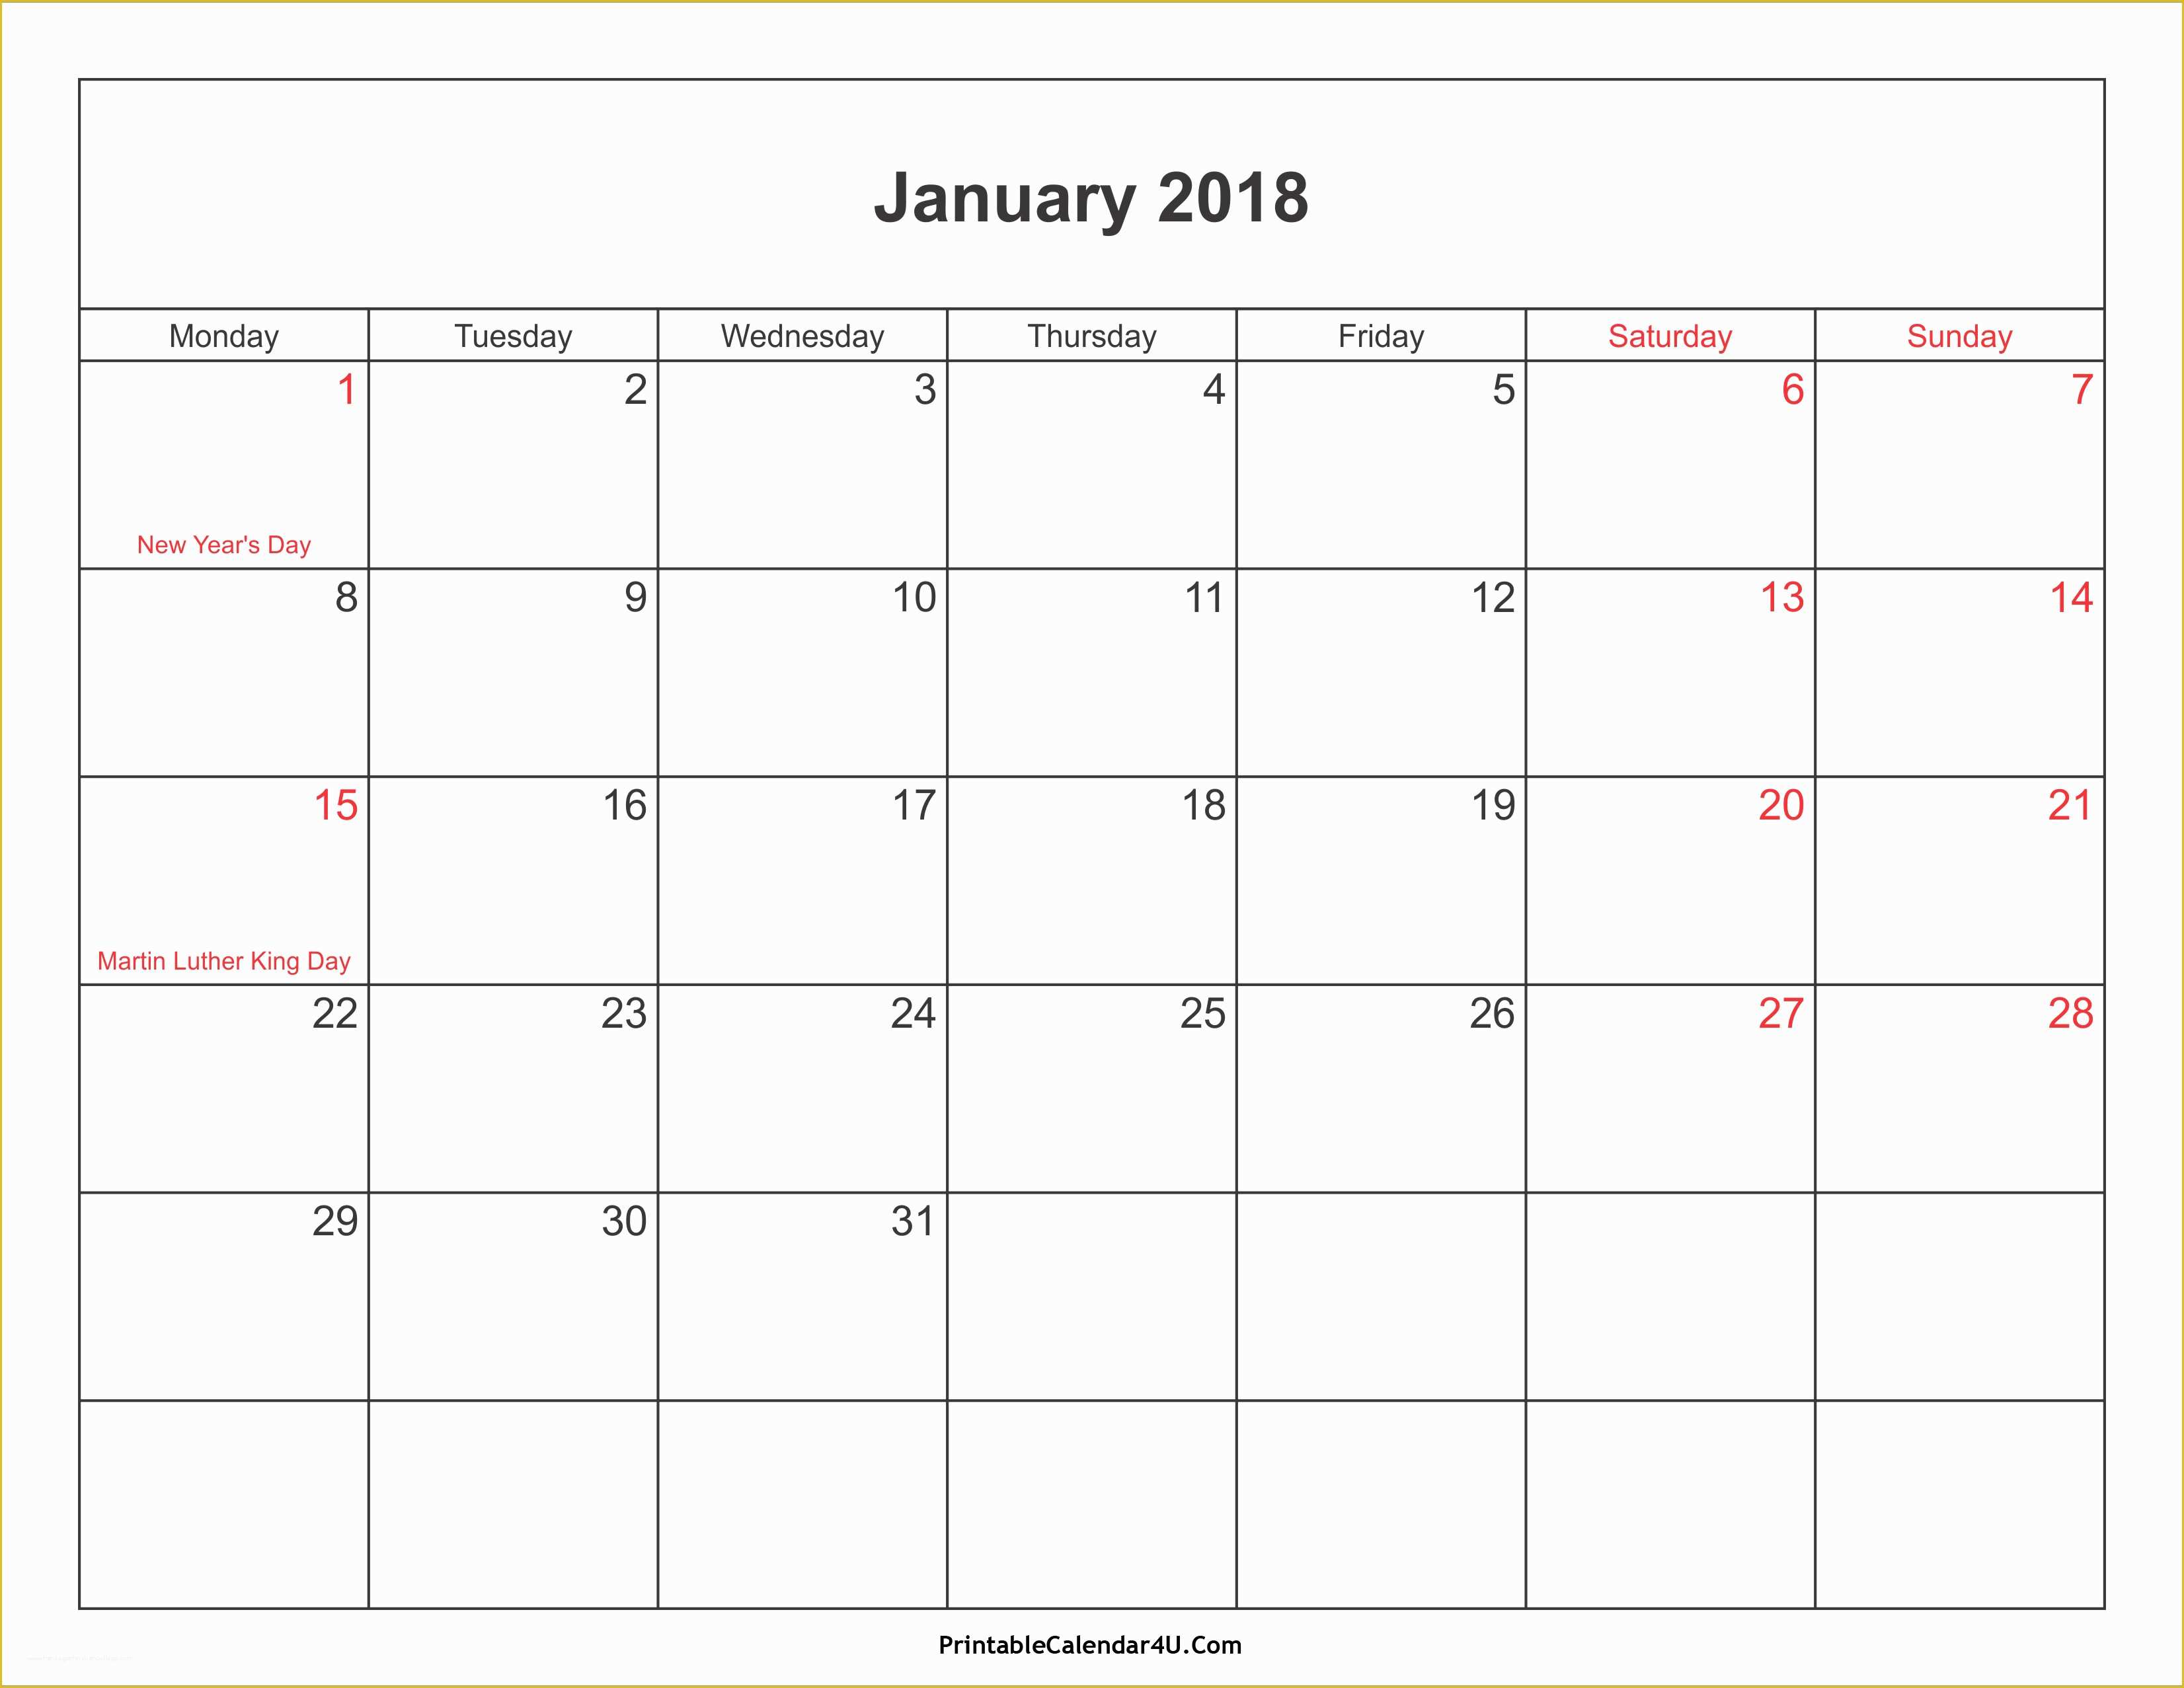 Holiday Schedule Template Free Of Free 2018 Calendar with Holidays